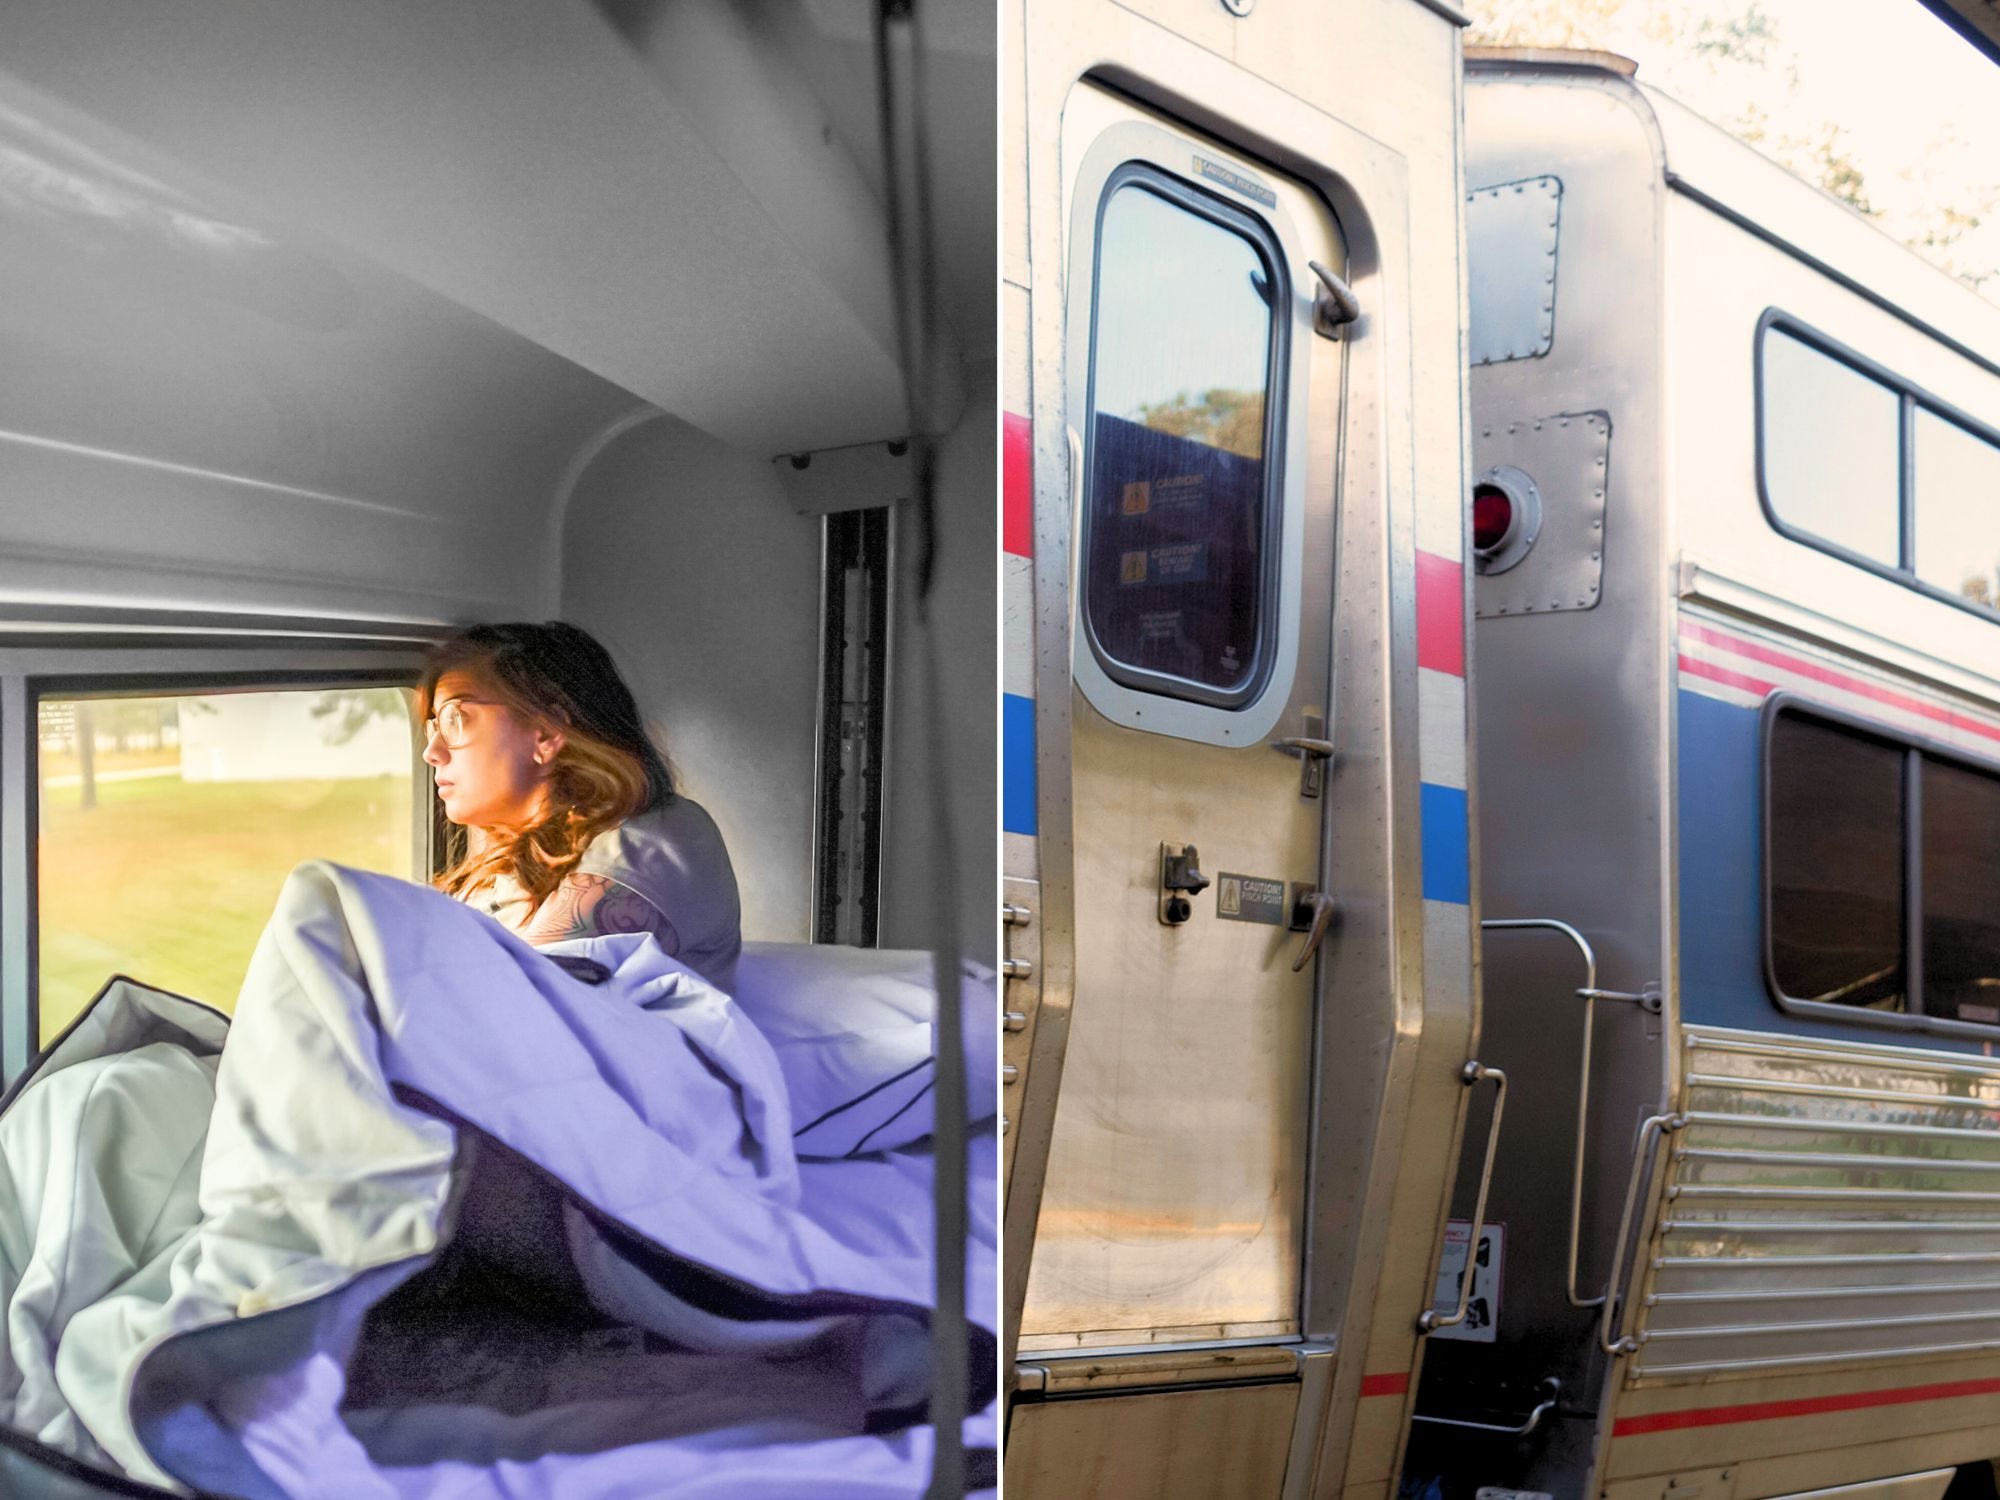 I spent 30 hours on an Amtrak from NYC to Miami. Here are 11 ways I made the long ride more bearable.